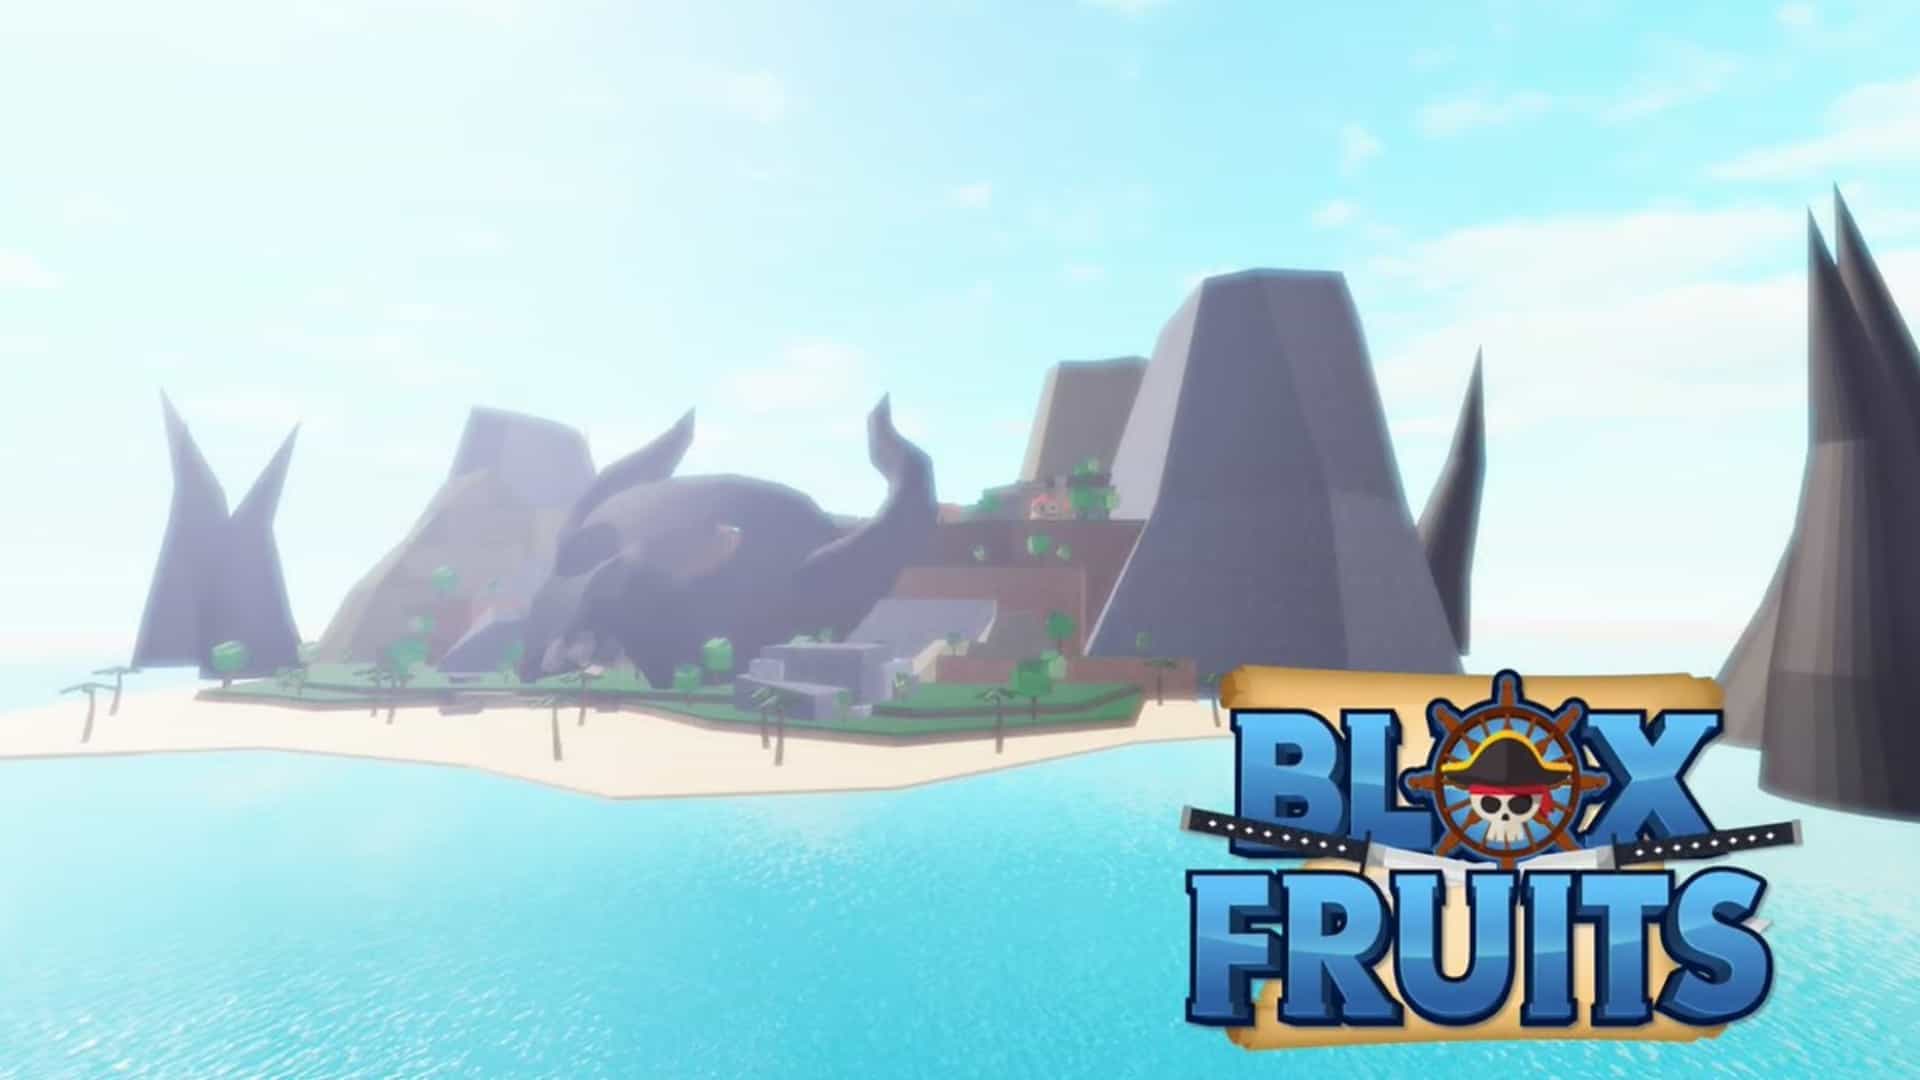 Blox Fruits Update 20 New Map Release Date & Name 